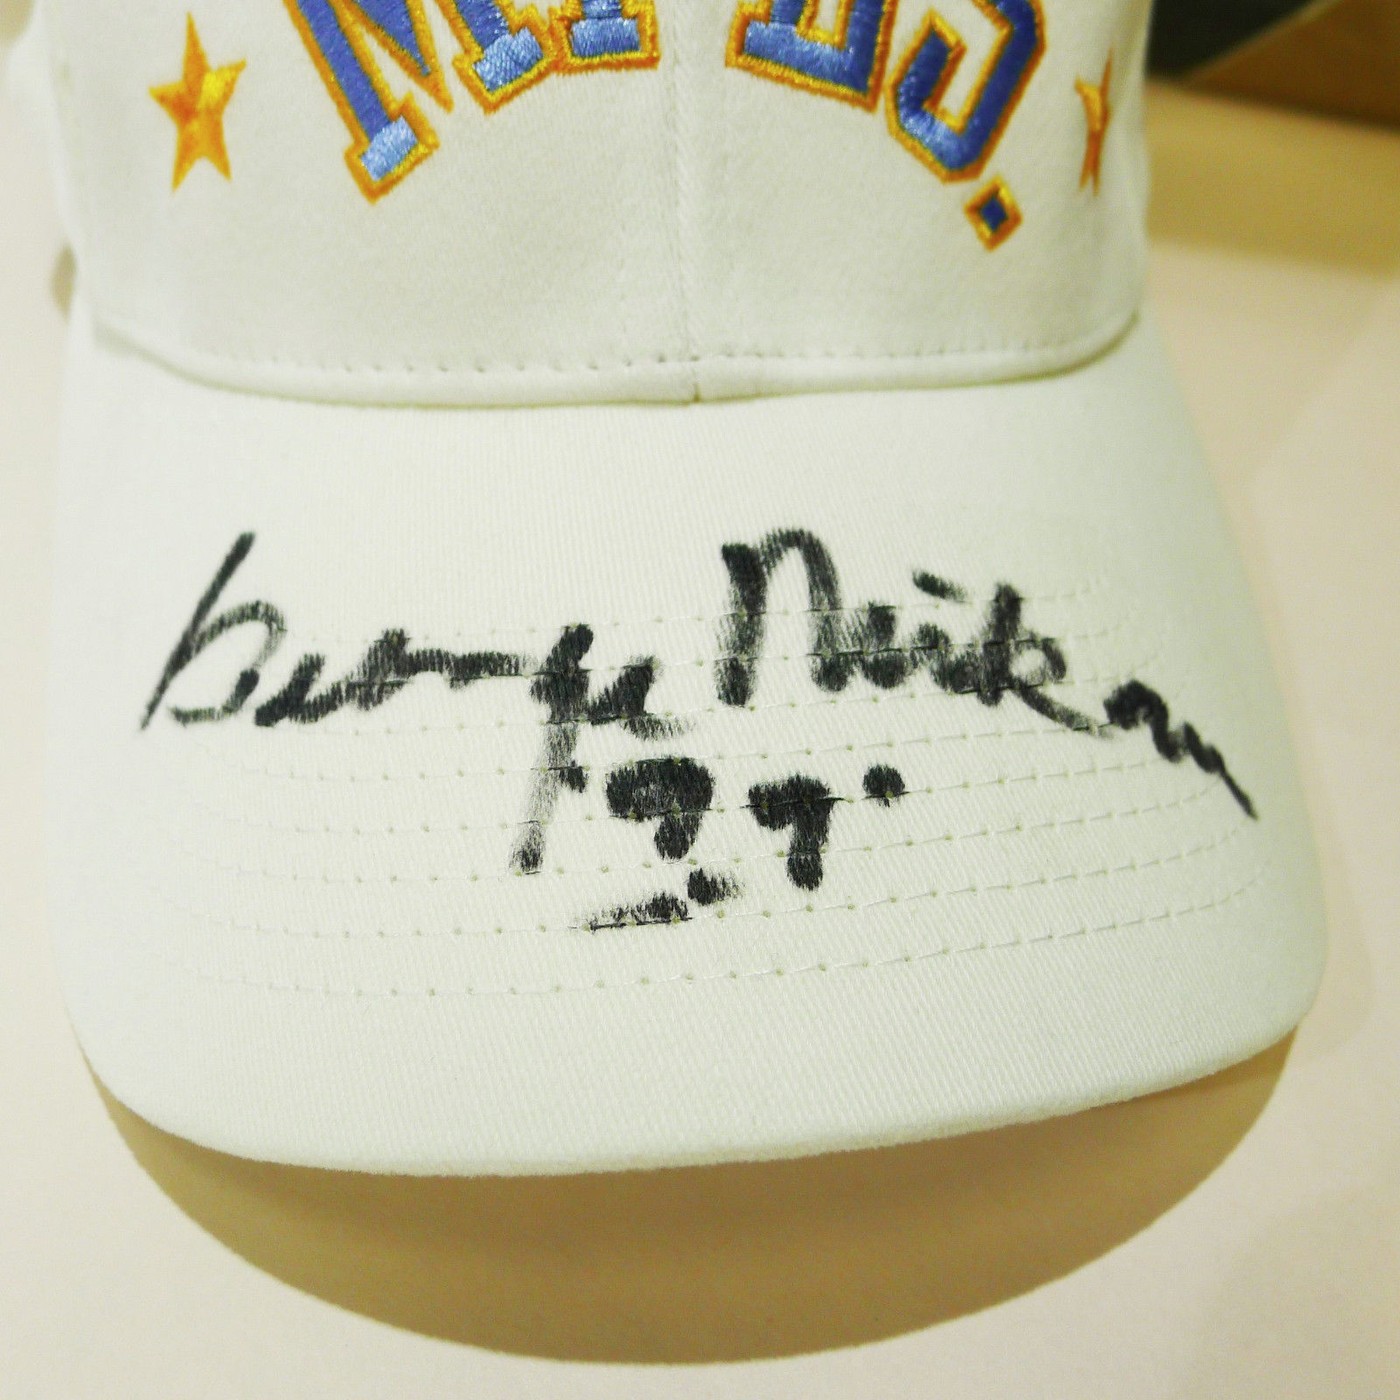 Los Angeles Lakers Autographed Hats, Signed Lakers Hats